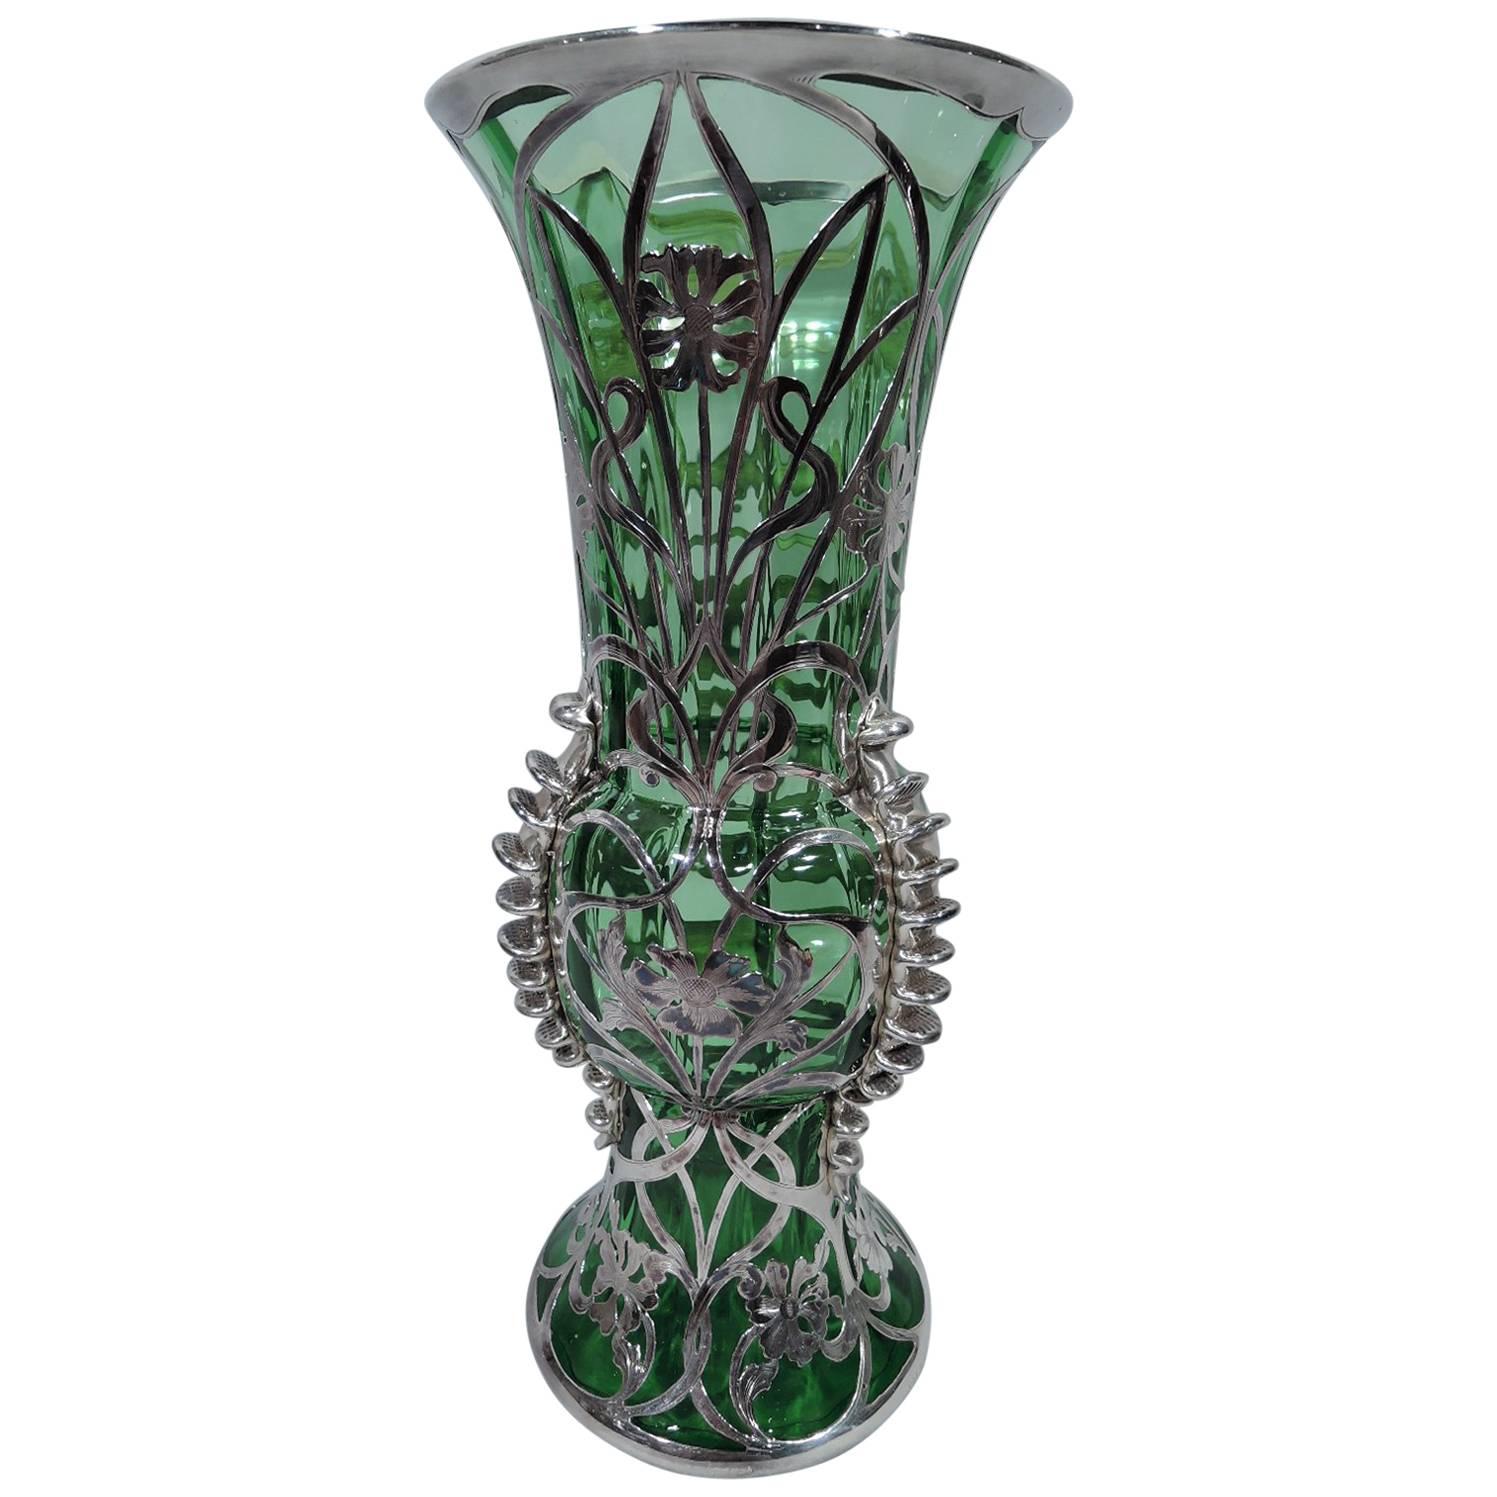 Gorham Tall and Unusual Silver Overlay Green Glass Vase